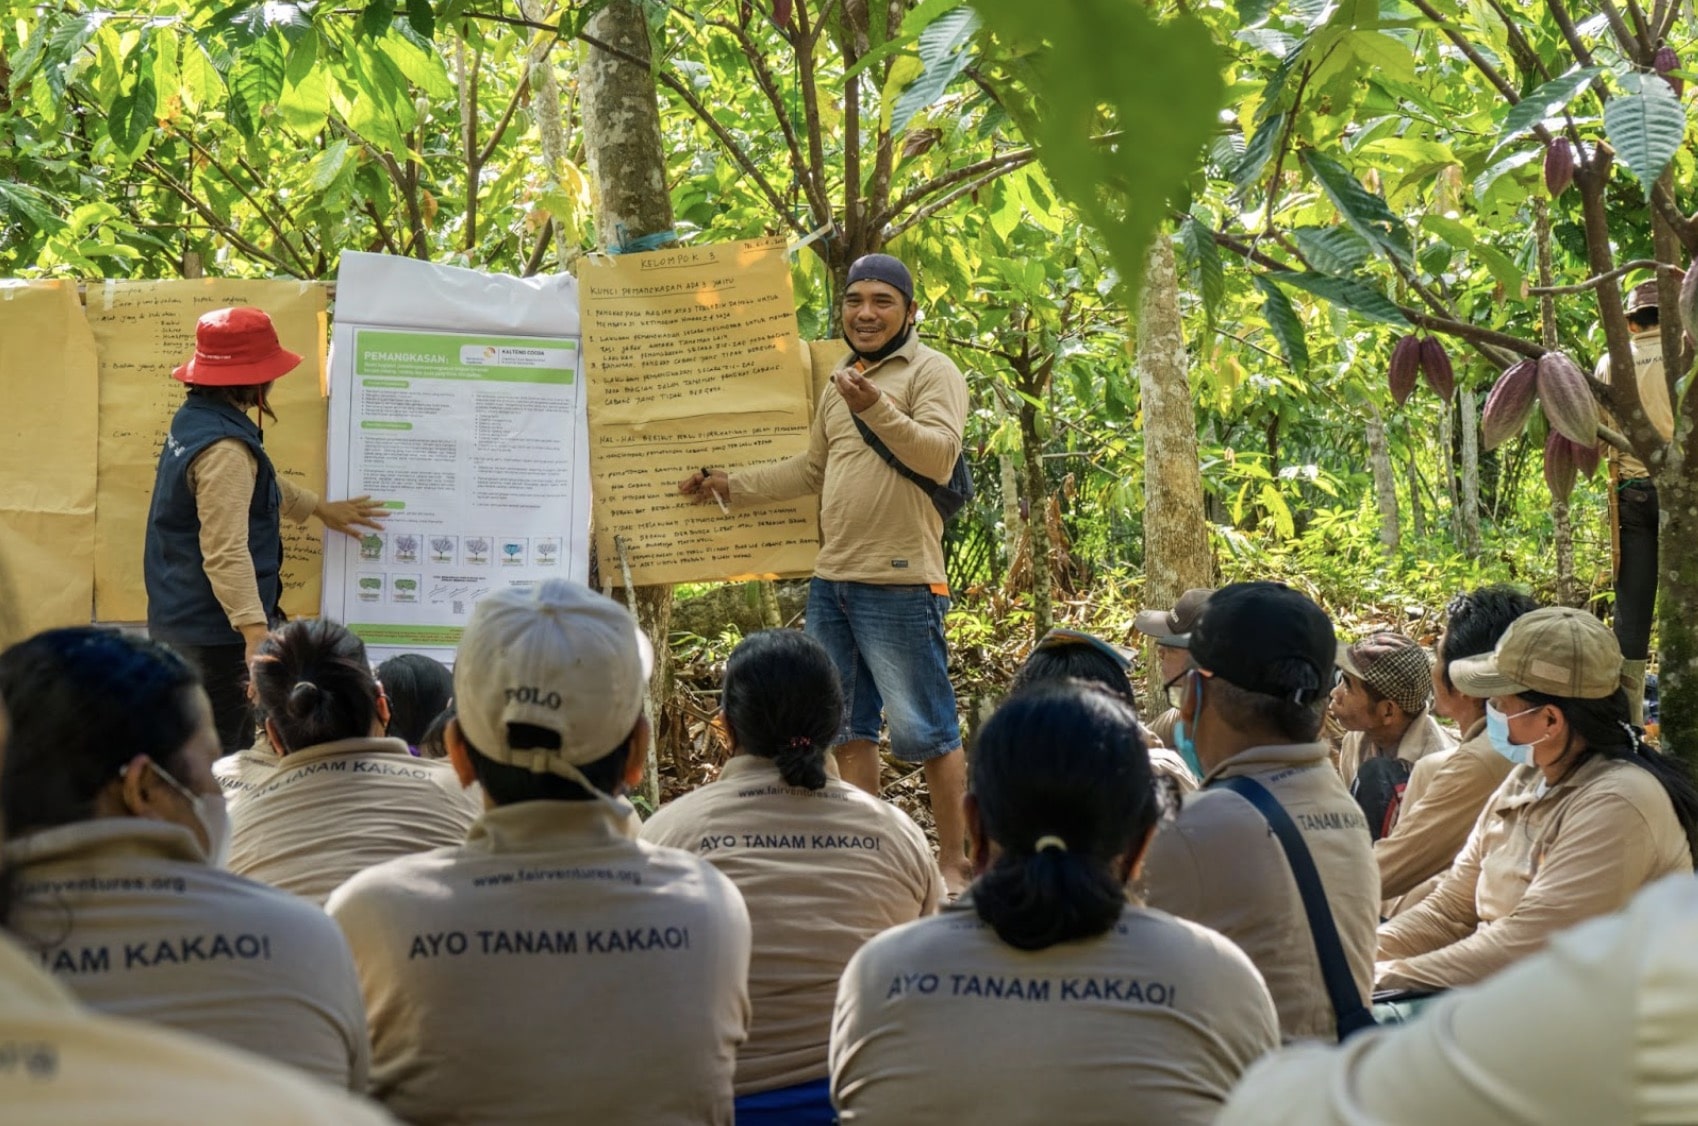 Trainer stands in front of group and points to his presentation in the forest